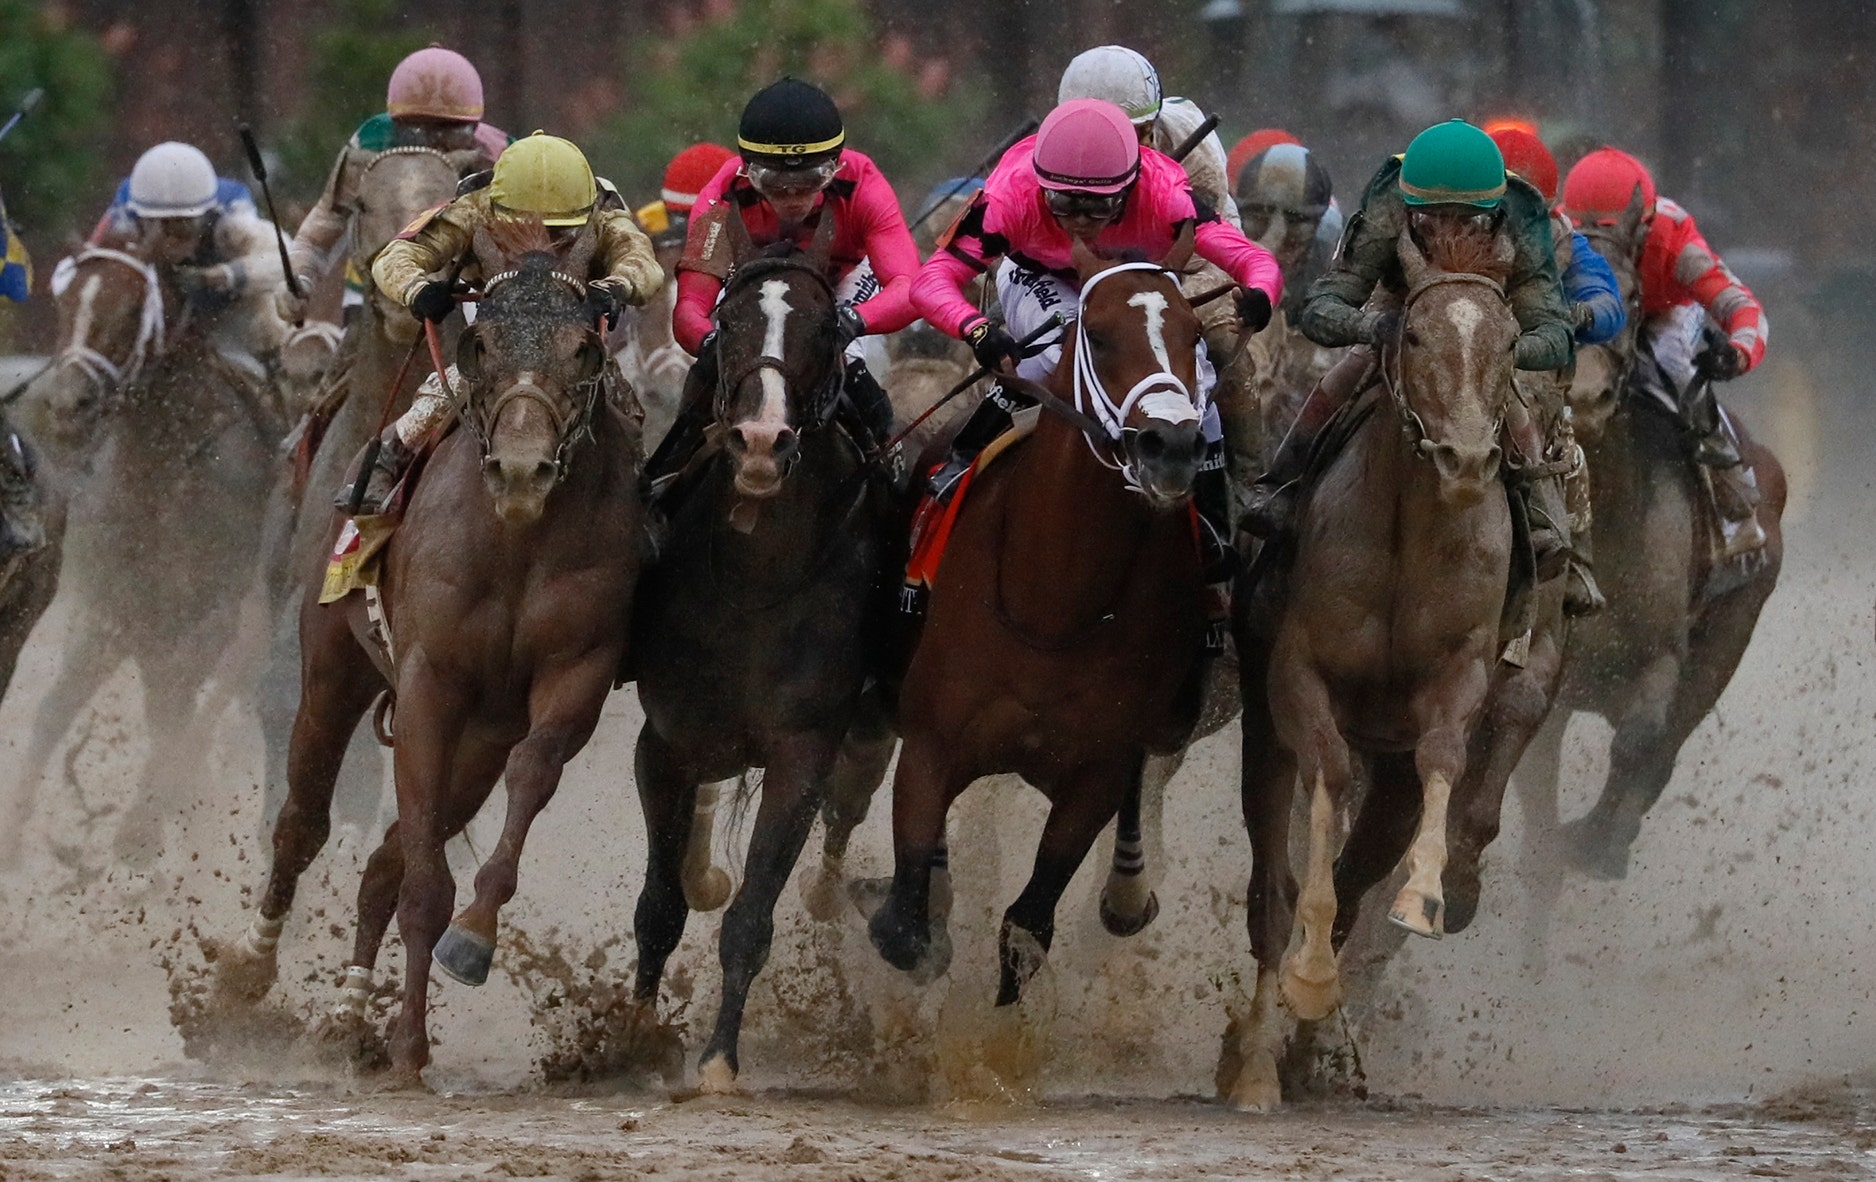 California racetrack suing animal-rights activists for disrupting horse racing: report